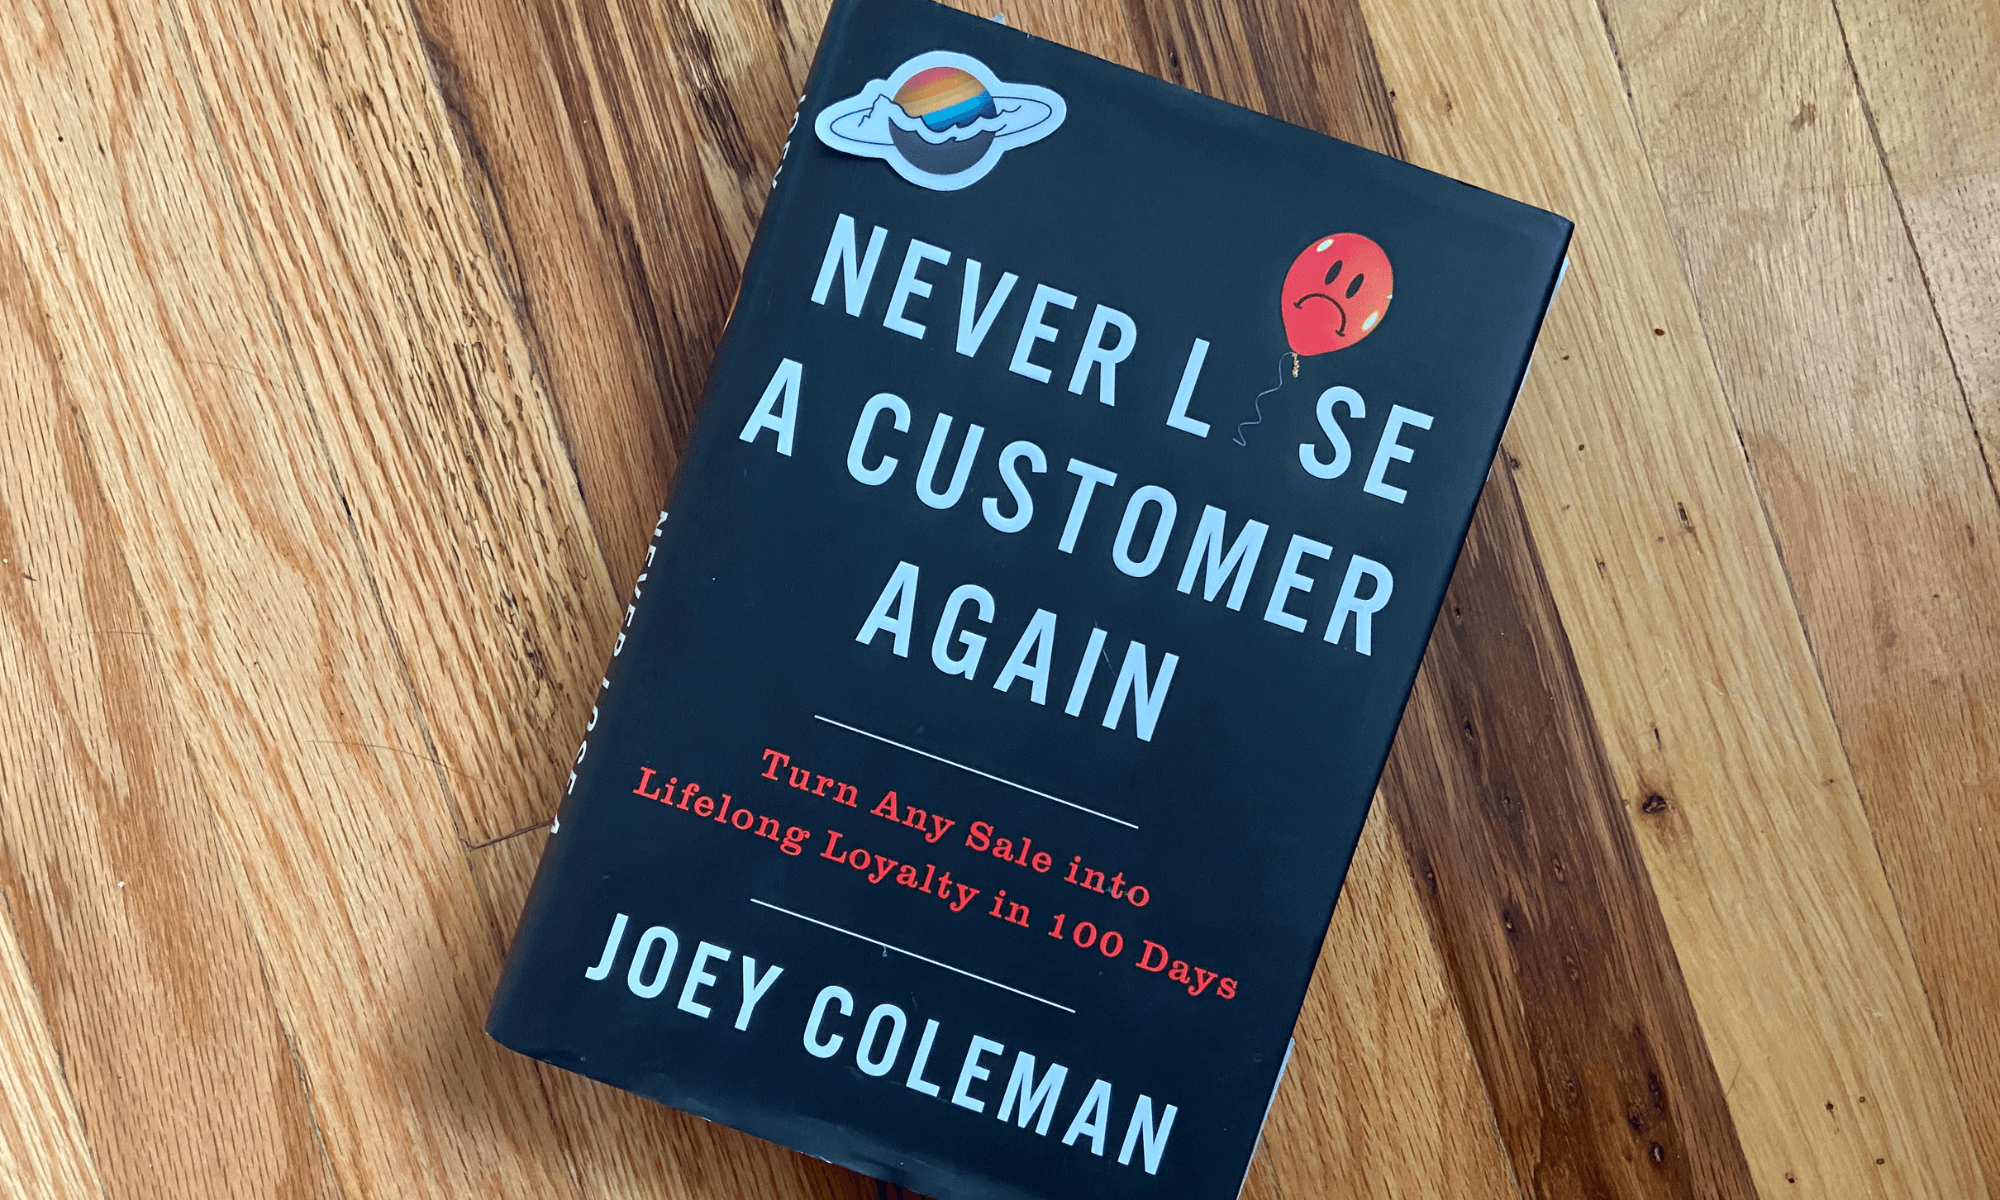 Photo of the book "Never Lose A Customer Again" by Joey Coleman